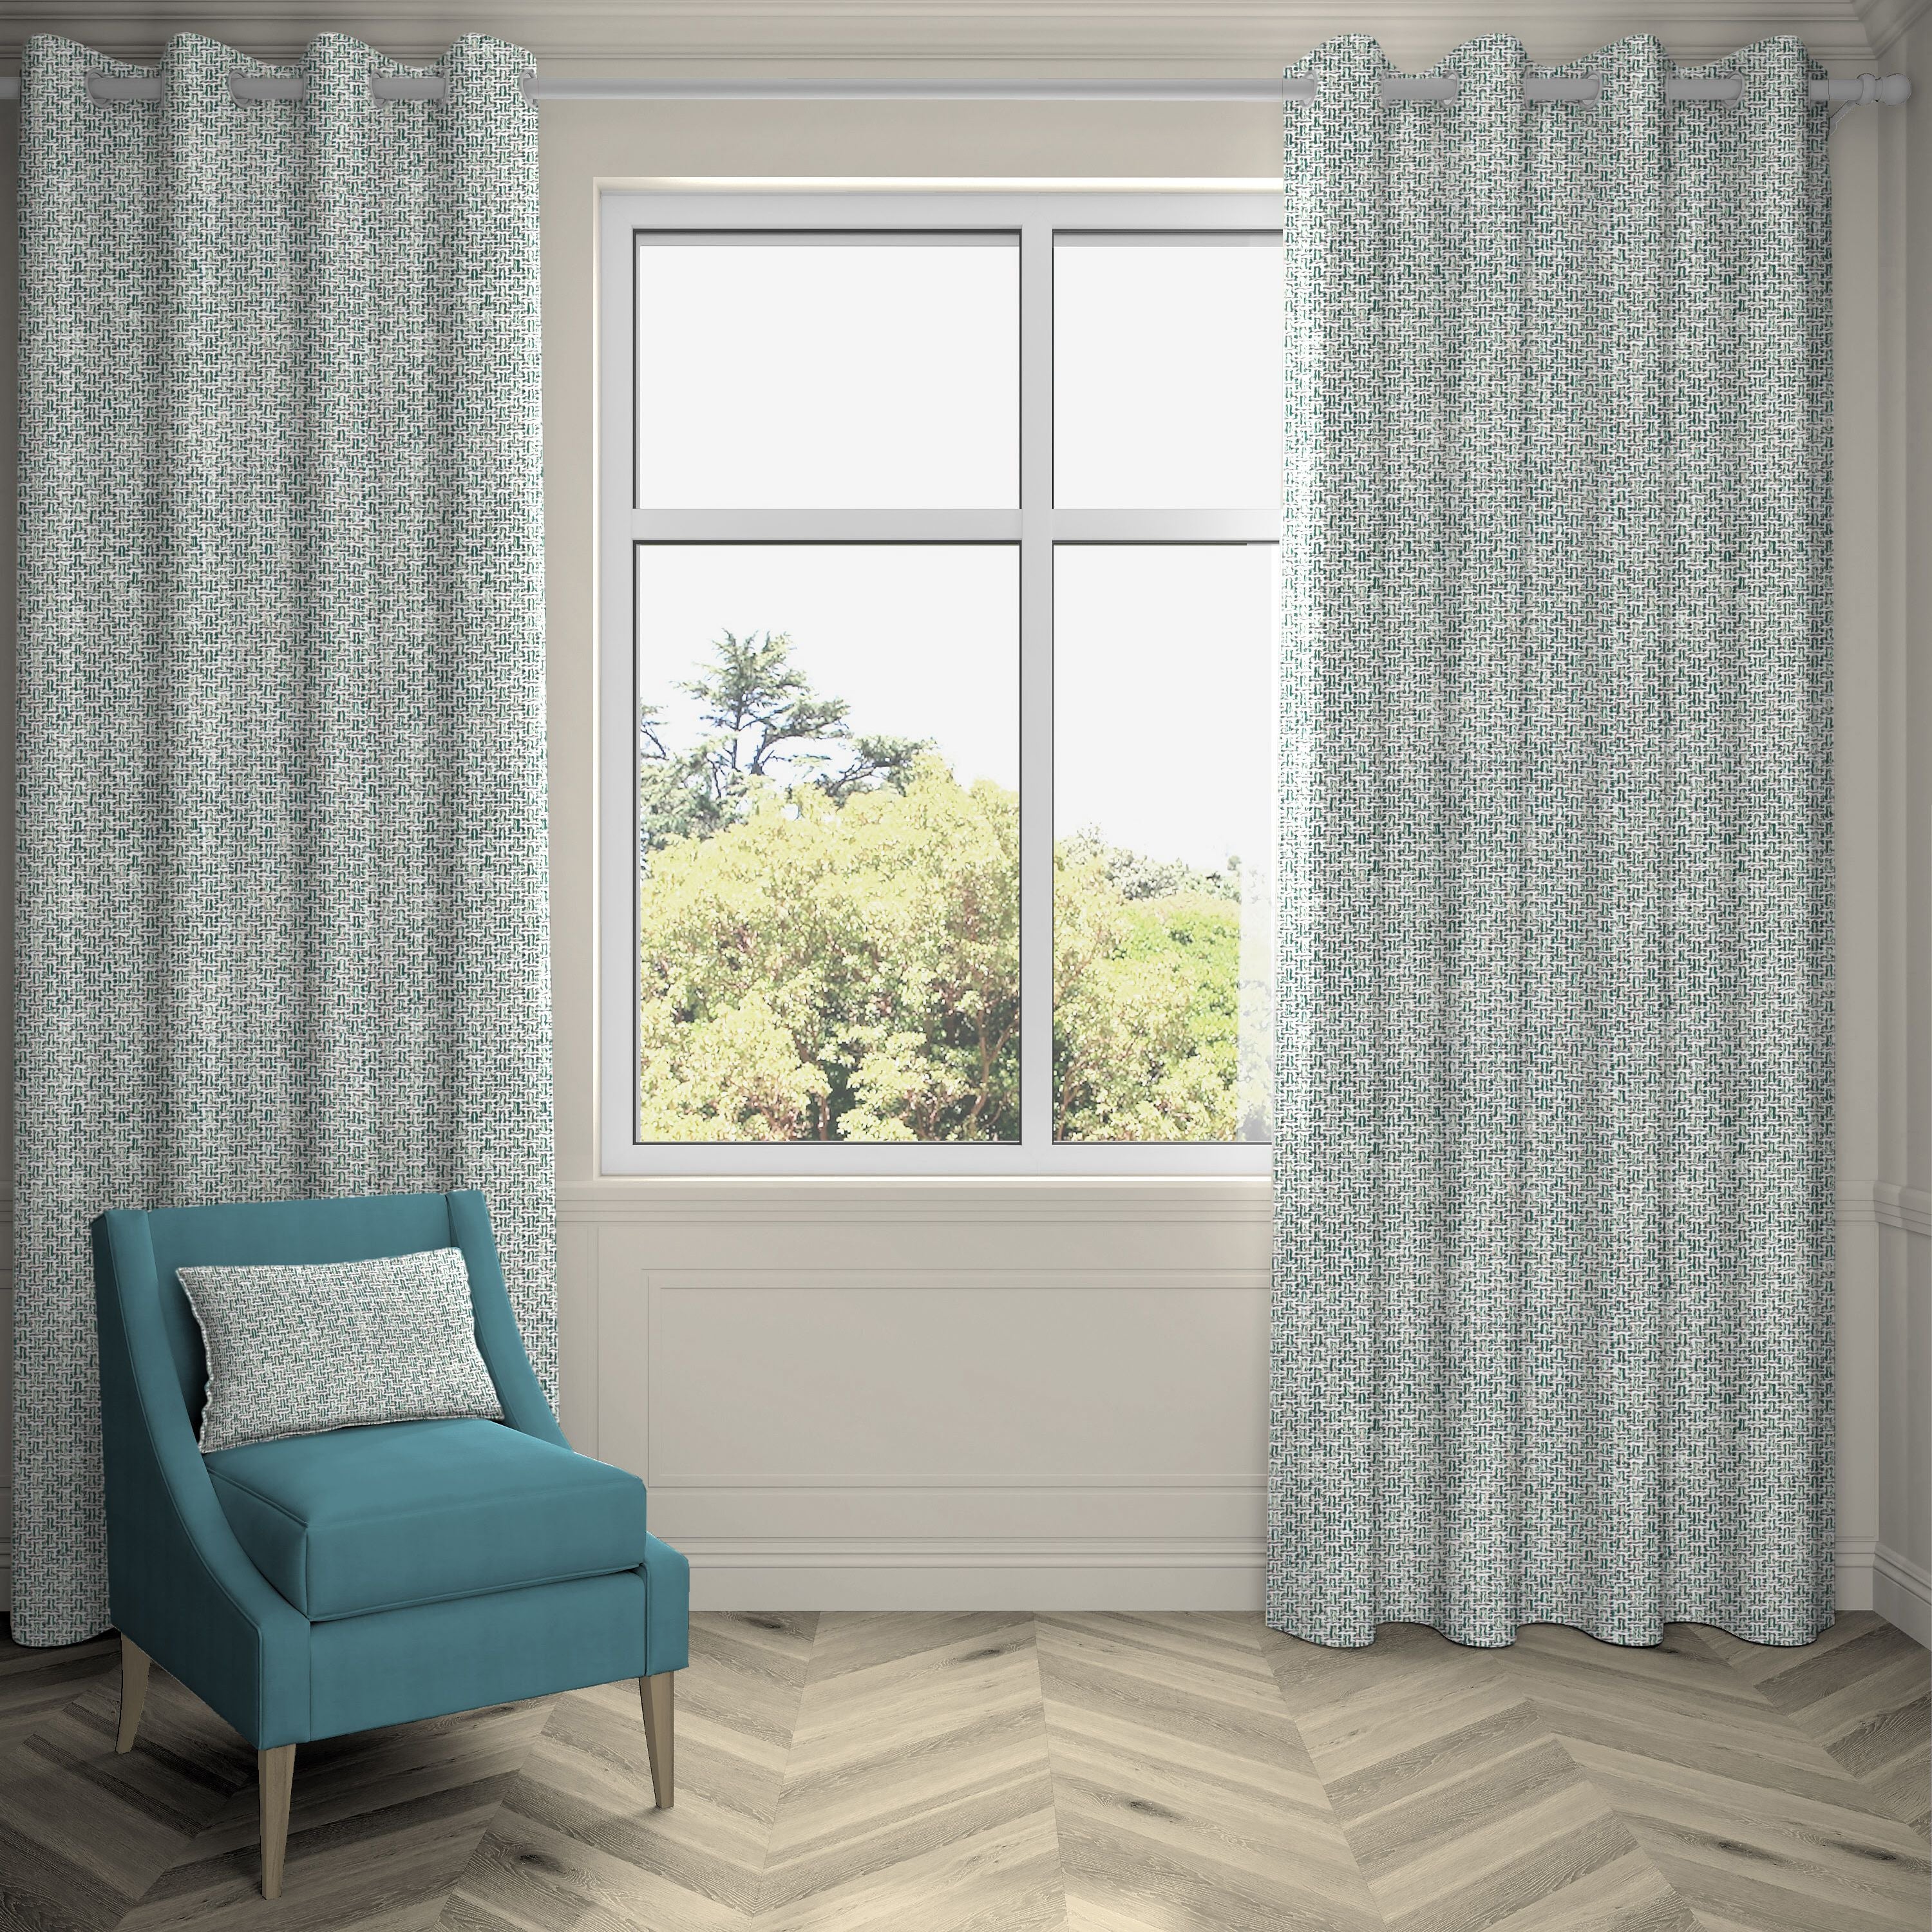 McAlister Textiles Skye Teal Tweed Curtains Tailored Curtains 